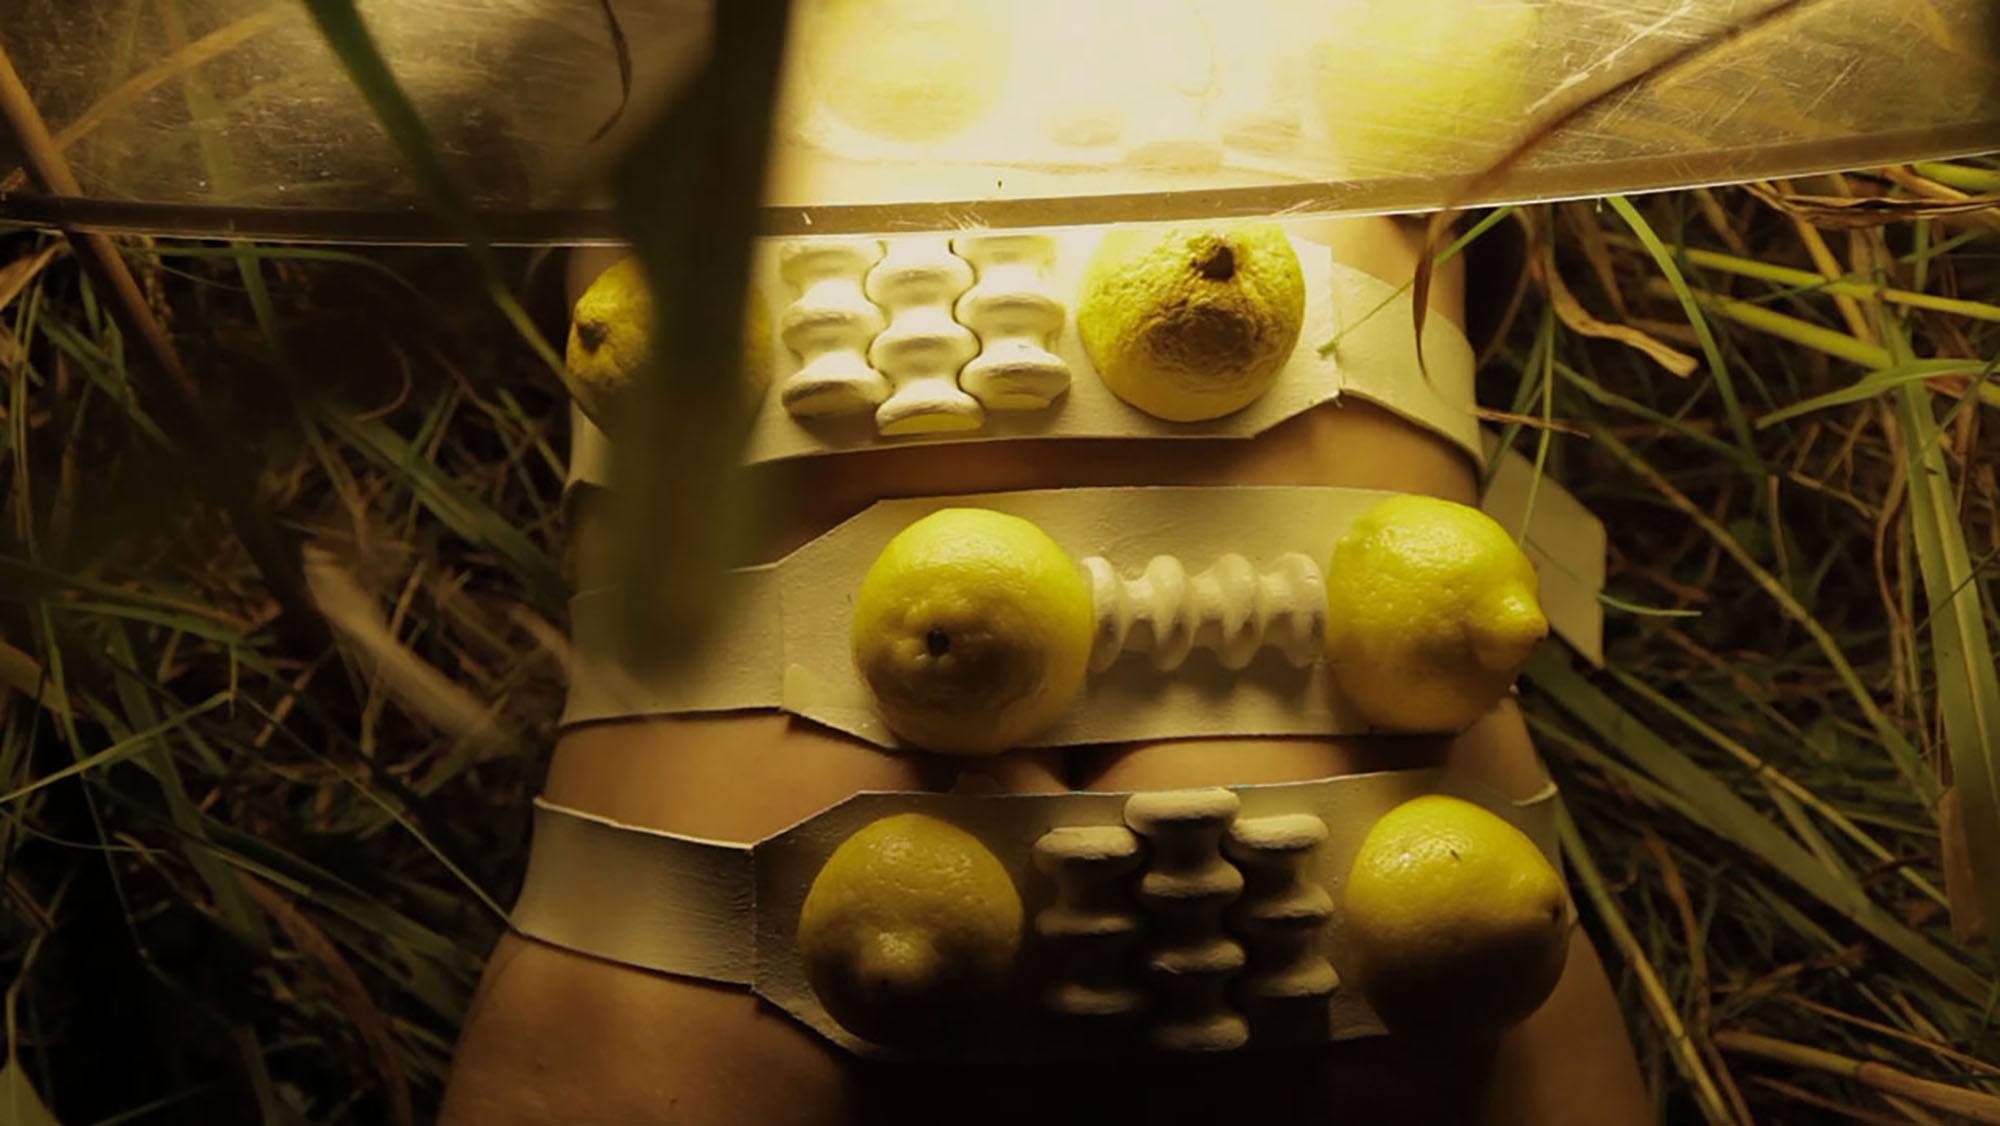 A person's torso laying in grass with belts containing half lemons